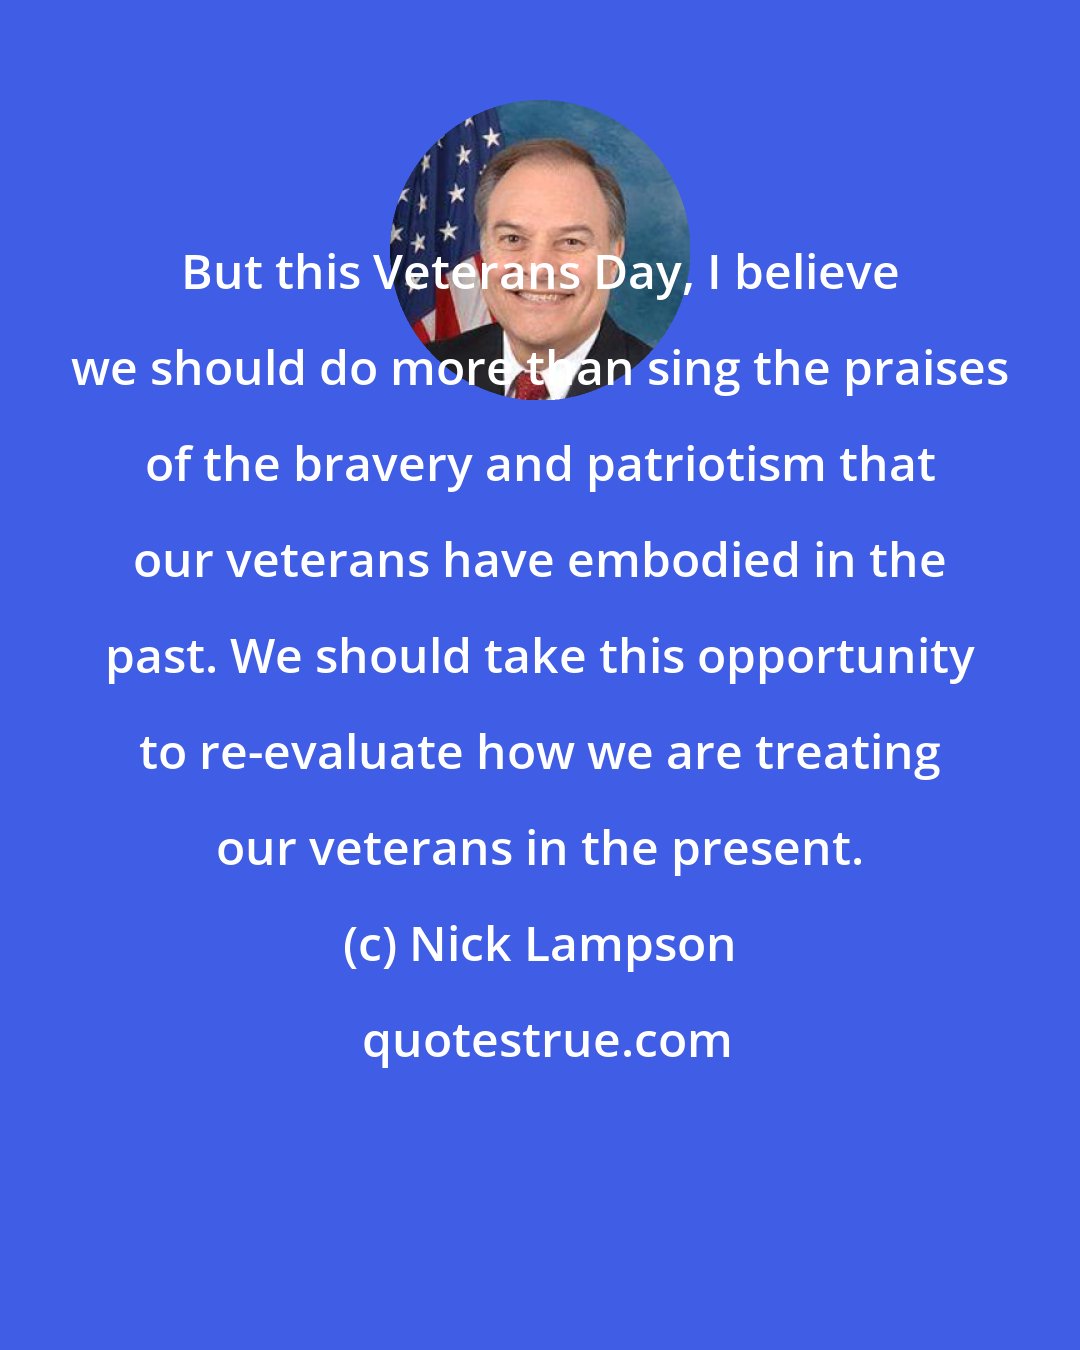 Nick Lampson: But this Veterans Day, I believe we should do more than sing the praises of the bravery and patriotism that our veterans have embodied in the past. We should take this opportunity to re-evaluate how we are treating our veterans in the present.